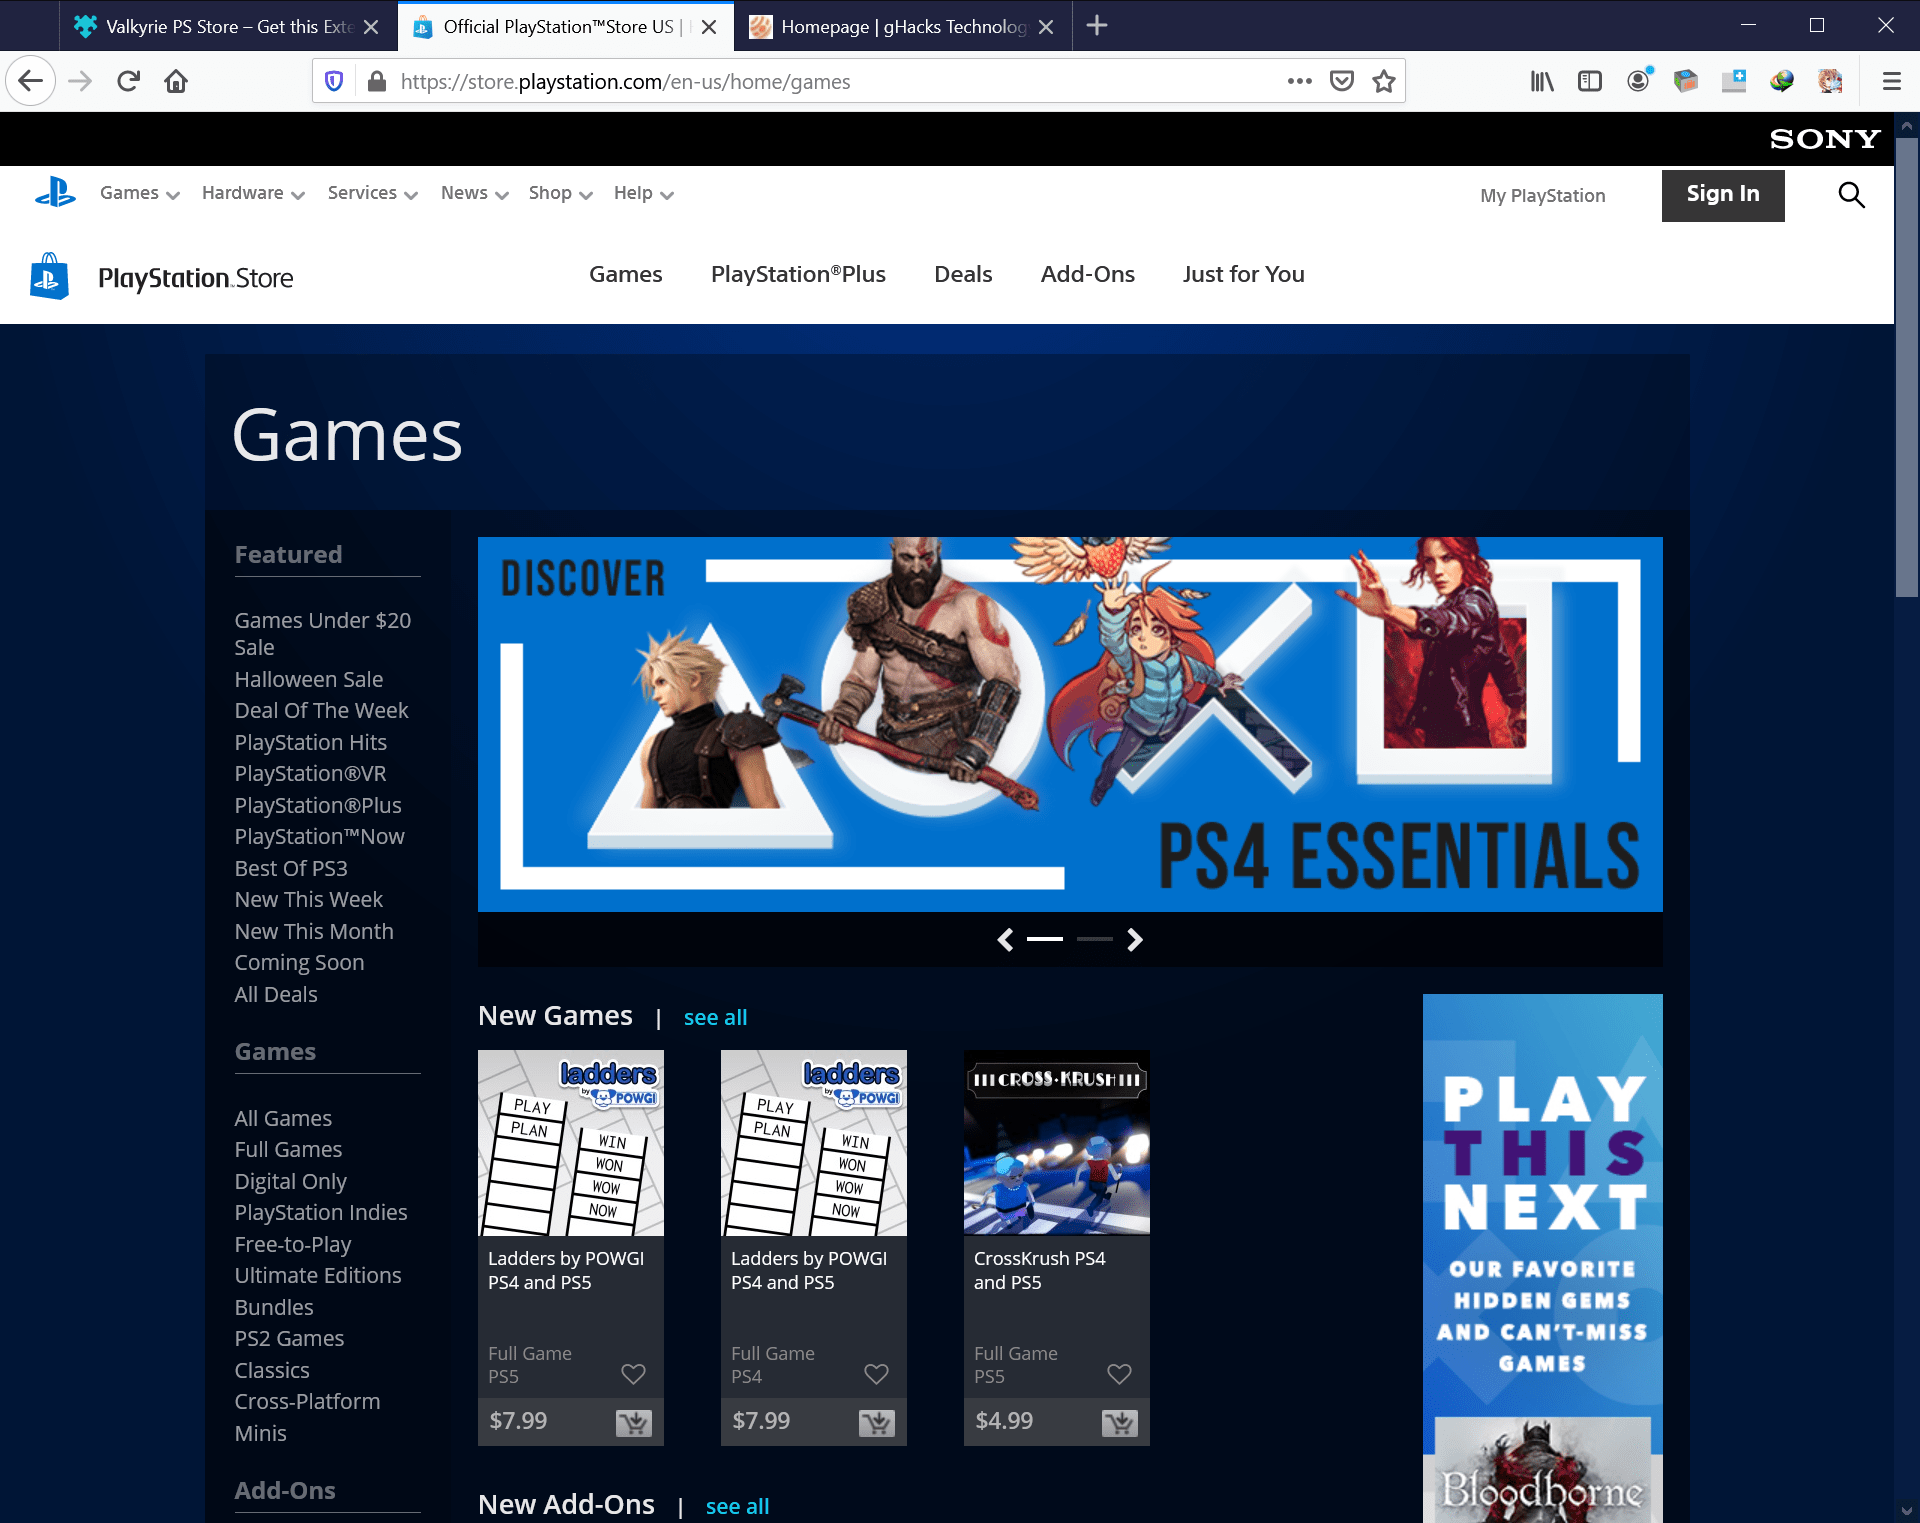 How to access the old PlayStation Store to browse, download and buy games and DLC